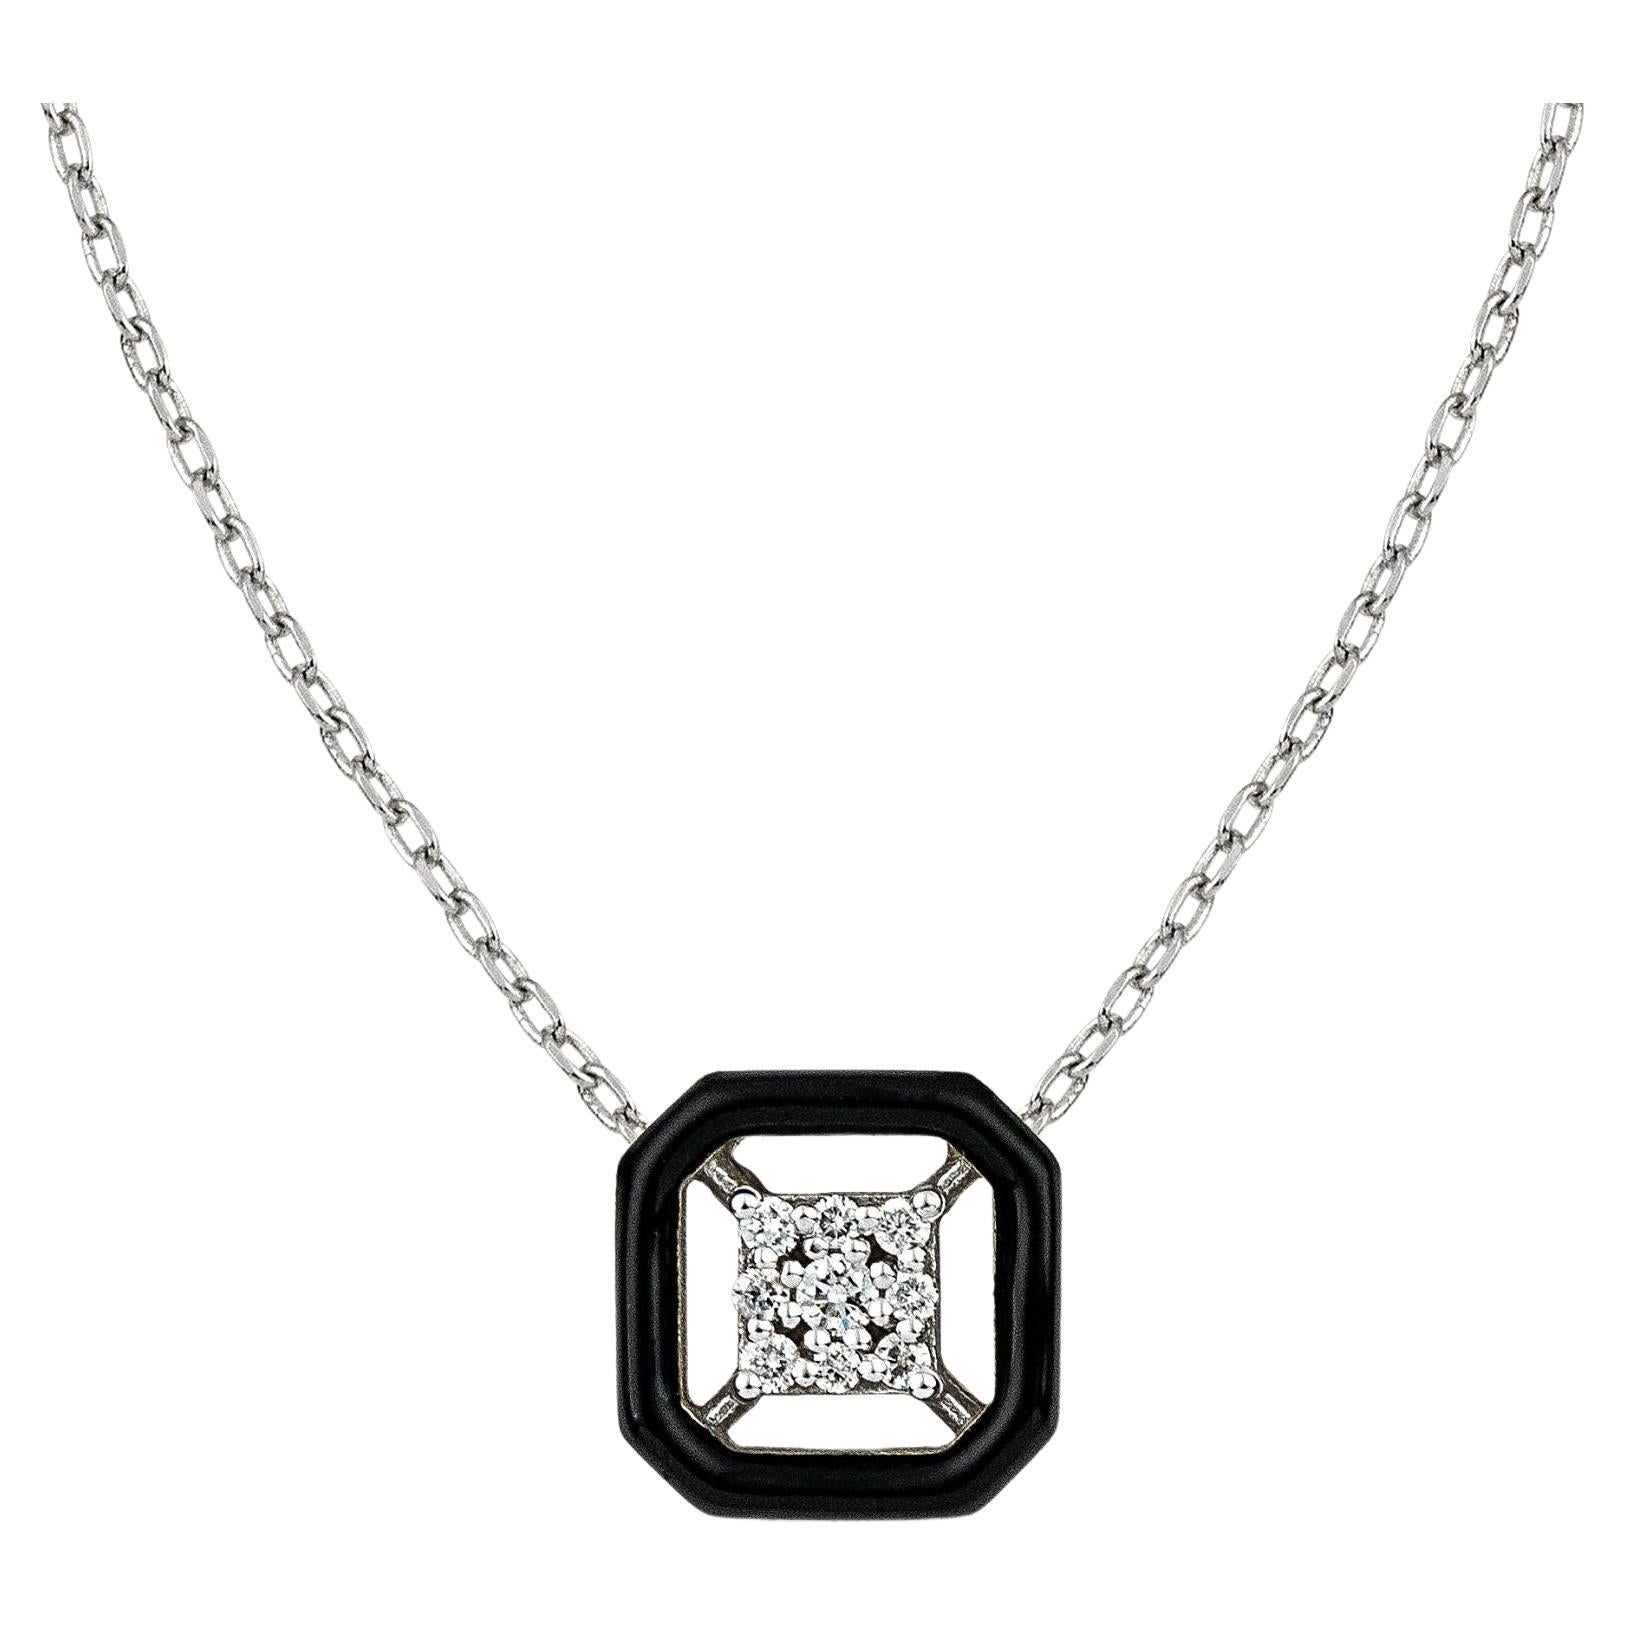 Deco Gold Necklace with Diamonds and Black Enamel